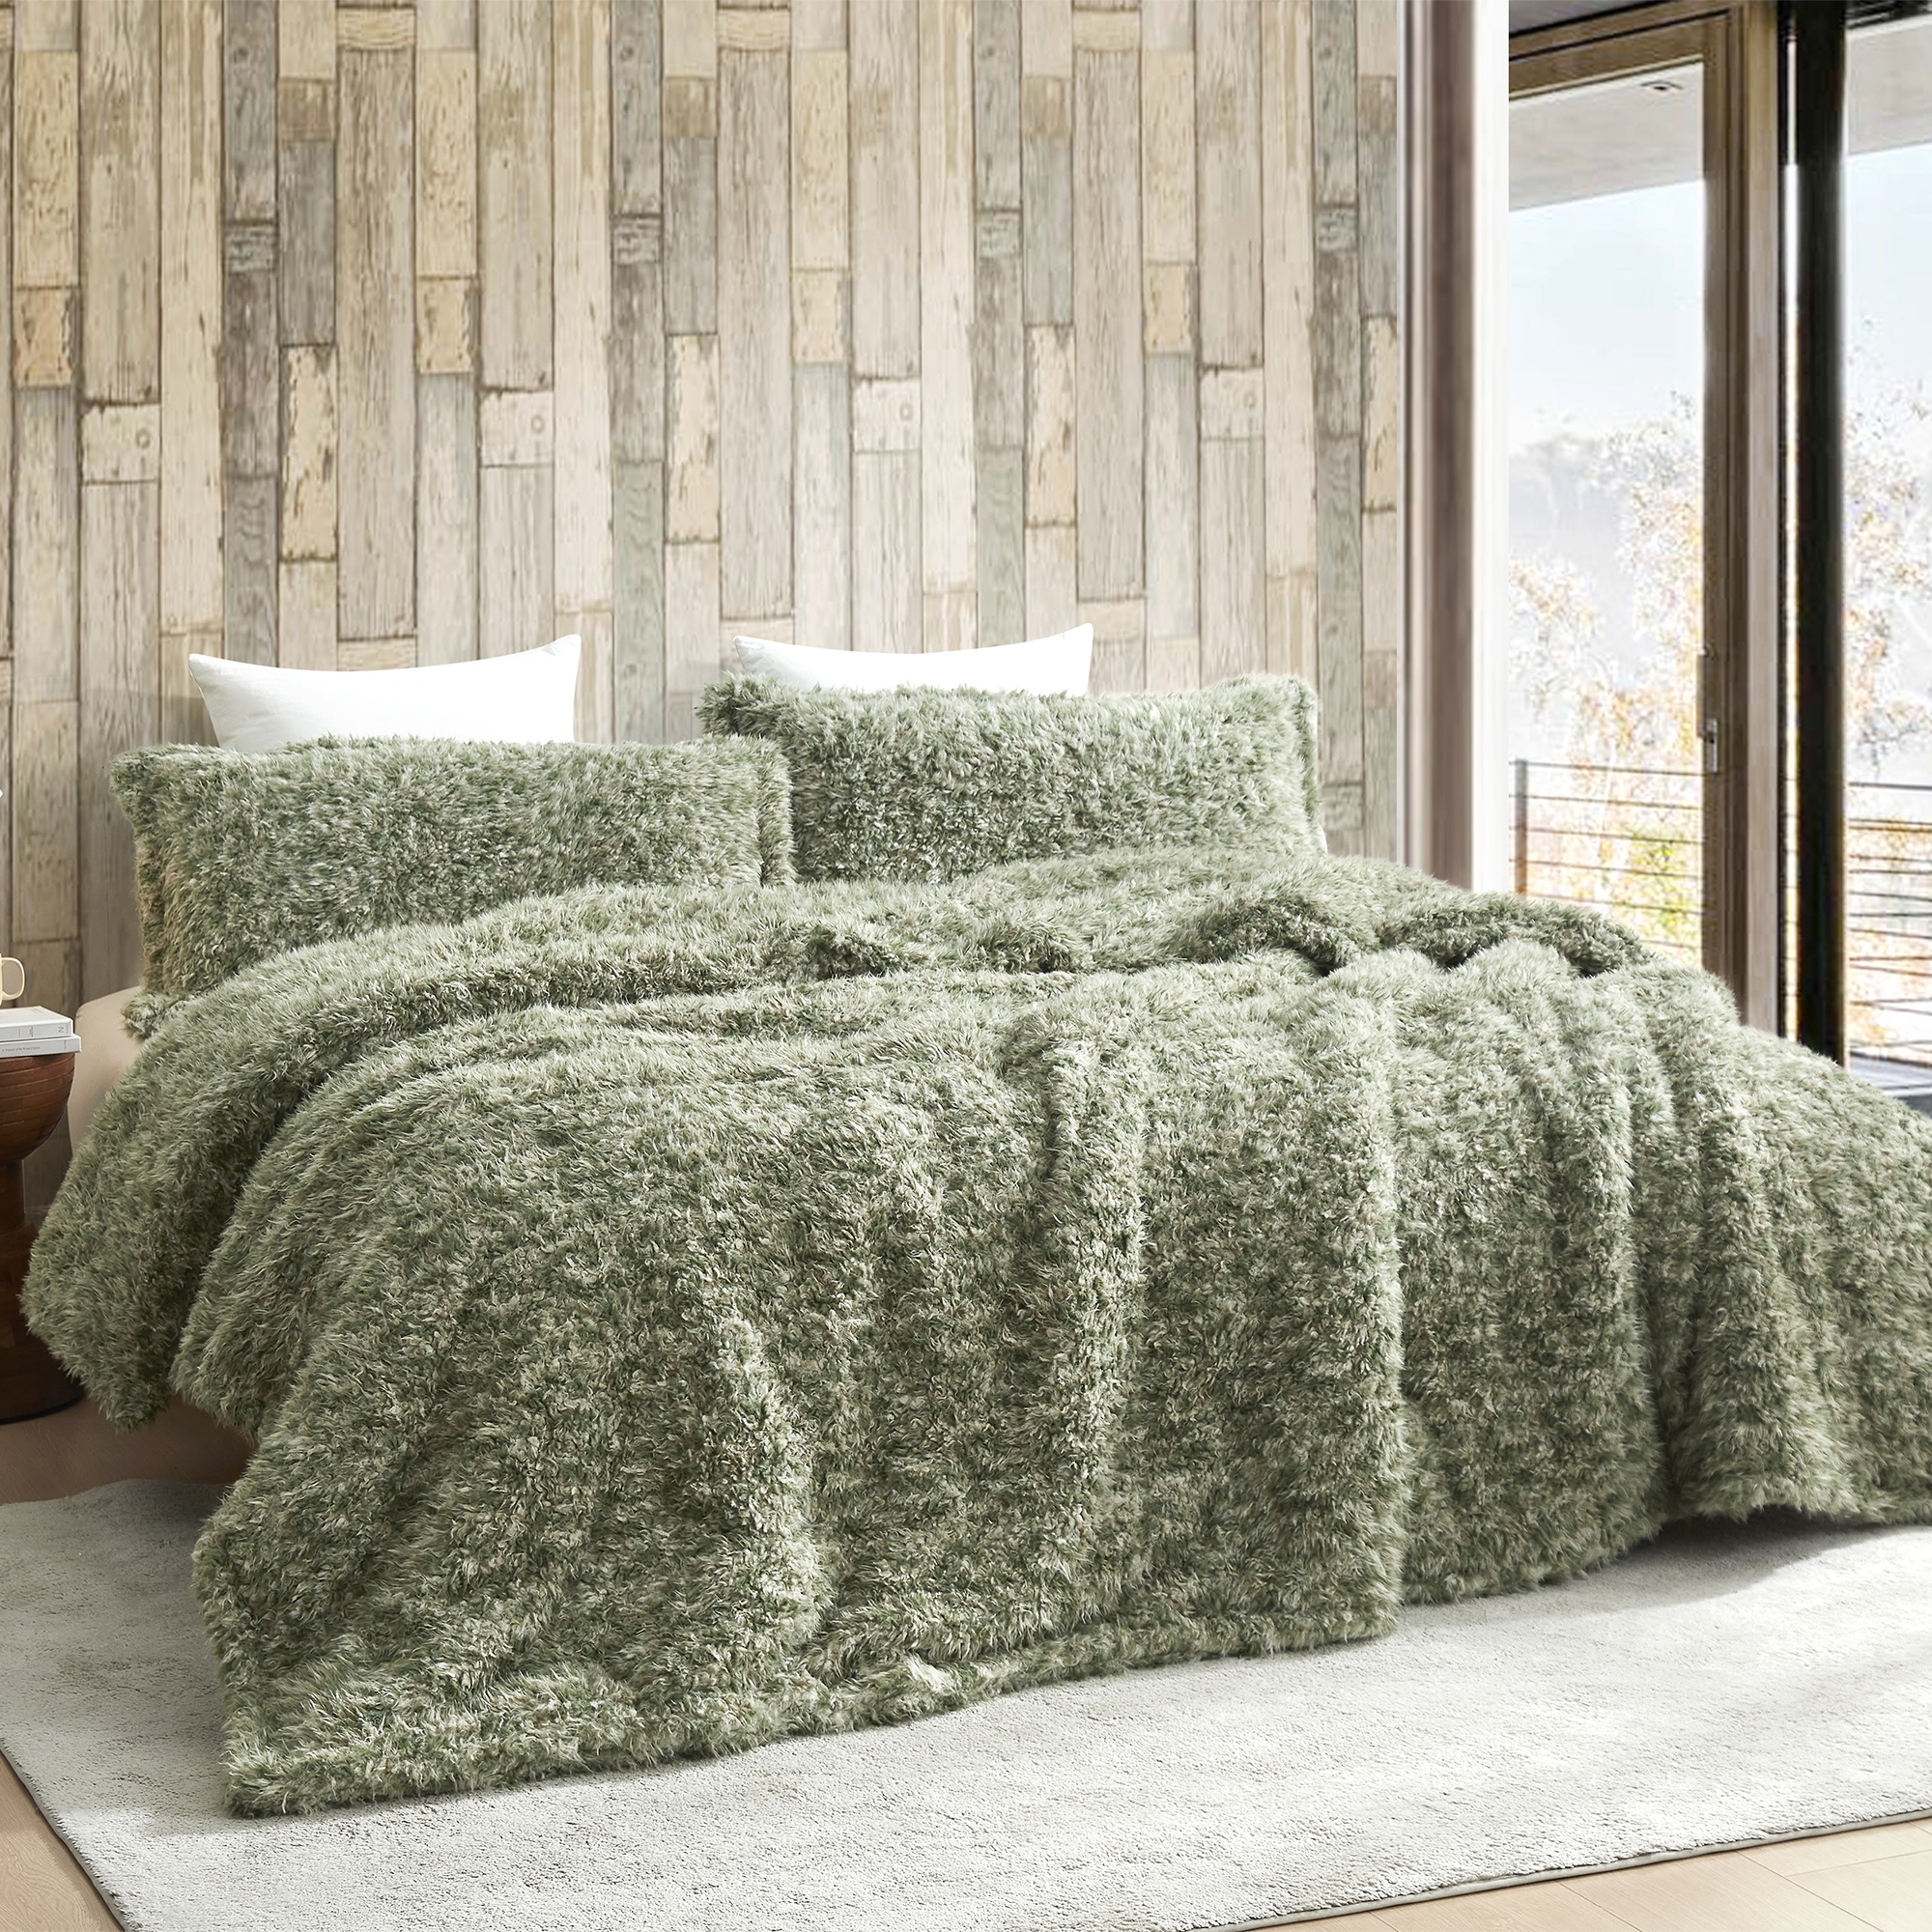 Sir Yes Sir - Coma Inducer® Oversized Comforter - Combat Green